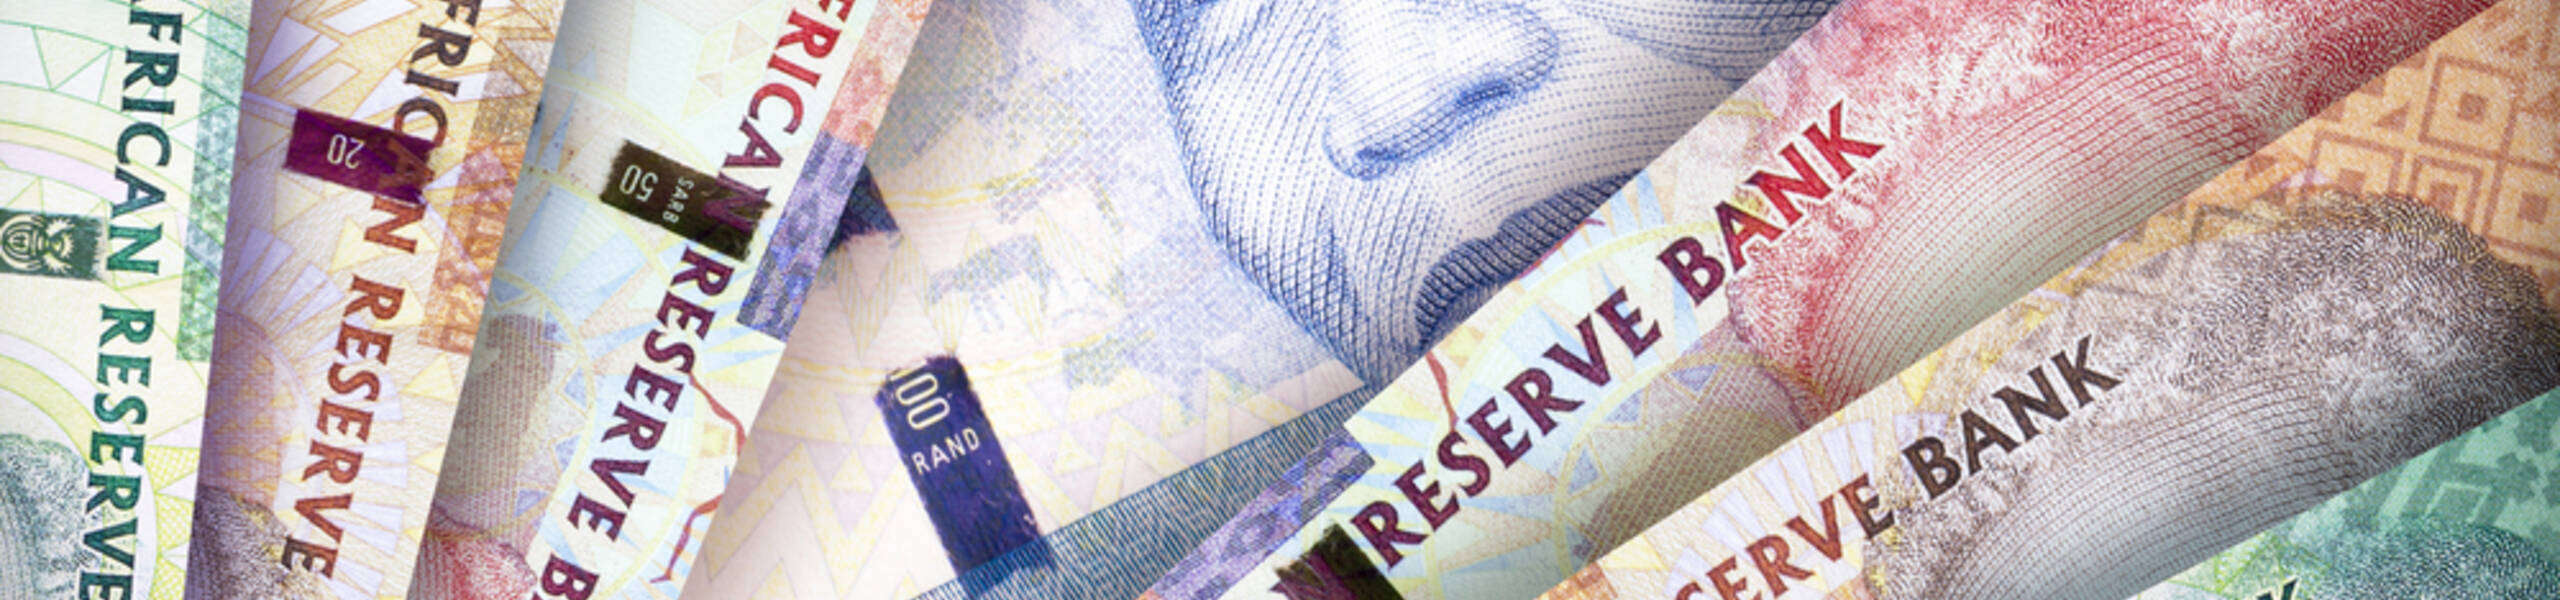 The key levels for the South African Rand this week